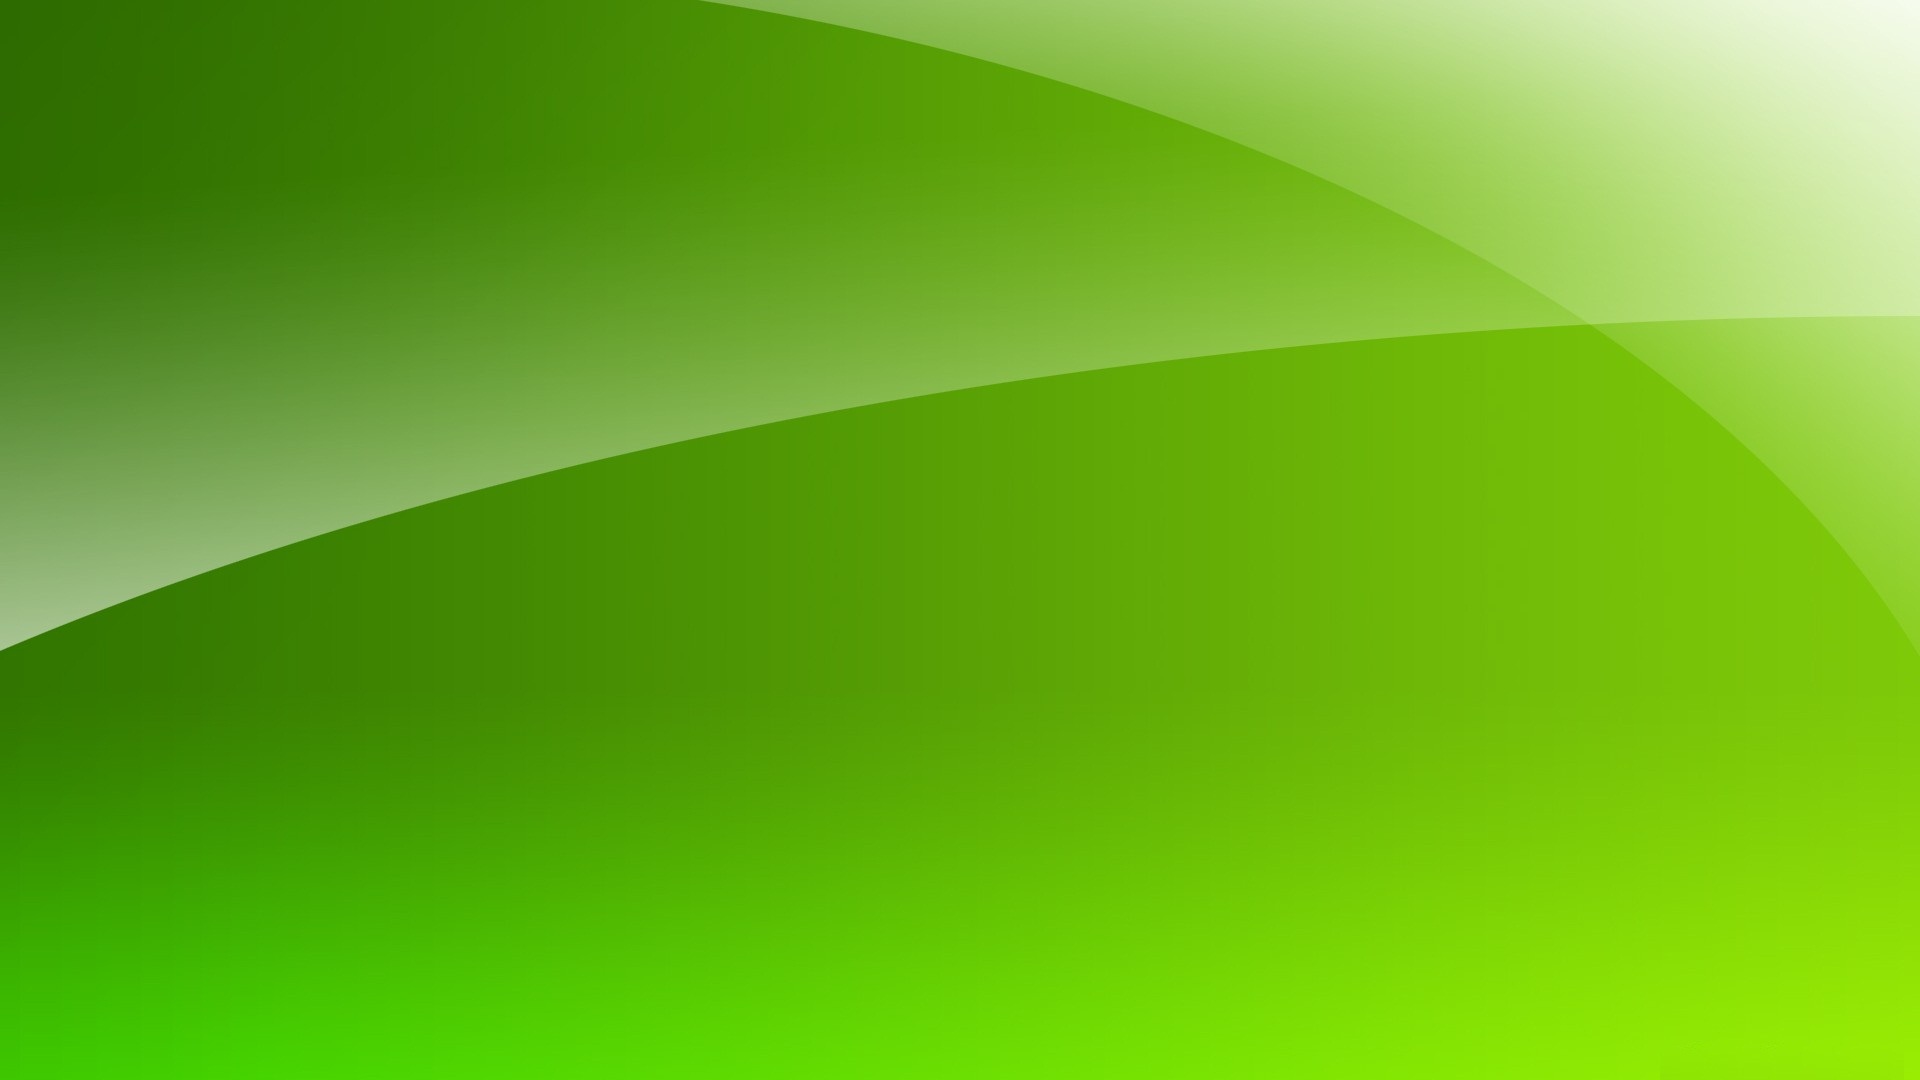 Lime Green Wallpaper For Desktop with image resolution 1920x1080 pixel. You can use this wallpaper as background for your desktop Computer Screensavers, Android or iPhone smartphones